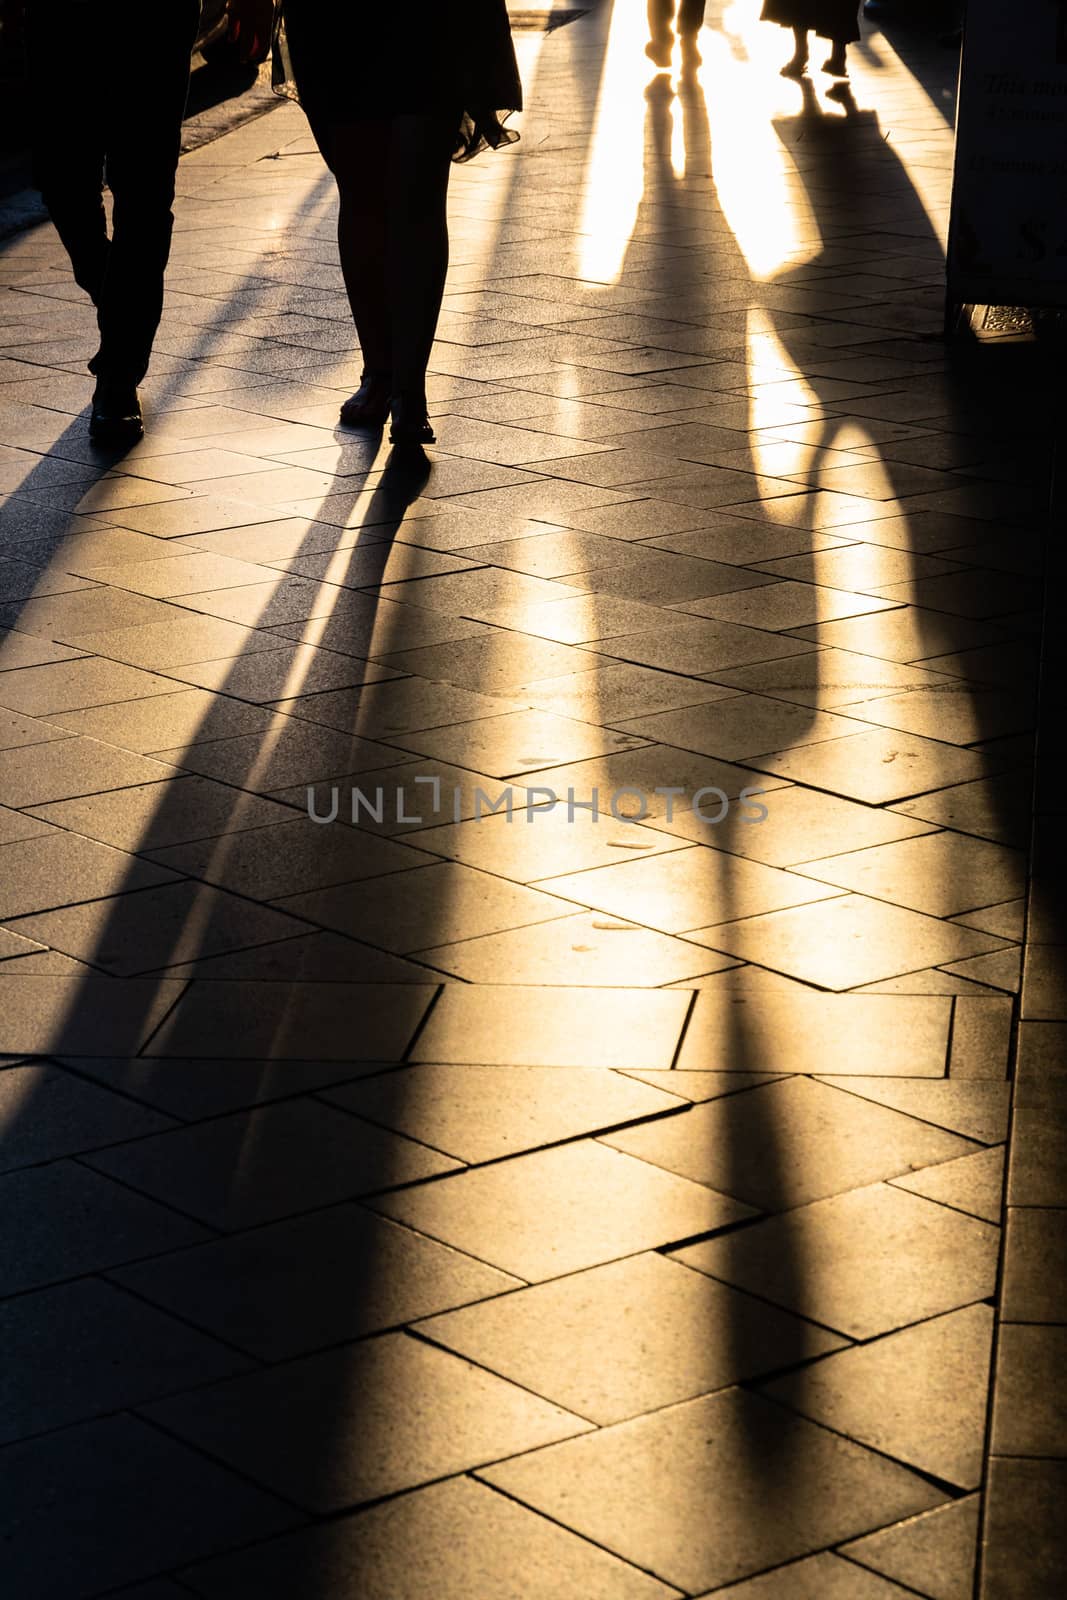 Backlight image of long shadows of people walking on the sidewalk. Captured just before sunset in Newtown, Sydney, Australia